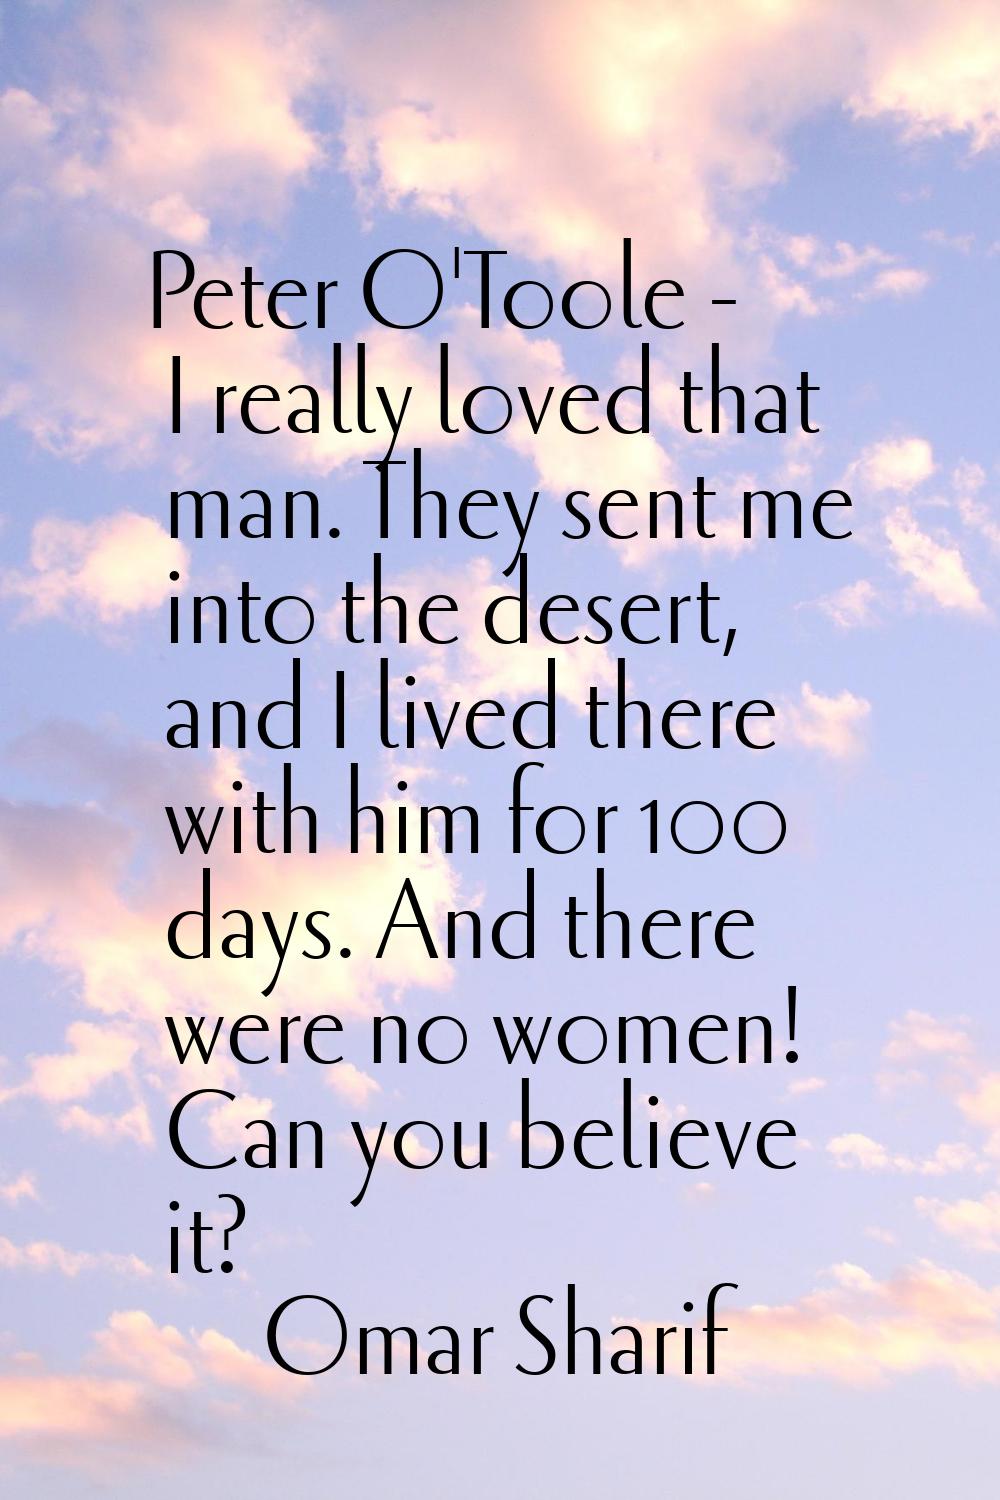 Peter O'Toole - I really loved that man. They sent me into the desert, and I lived there with him f